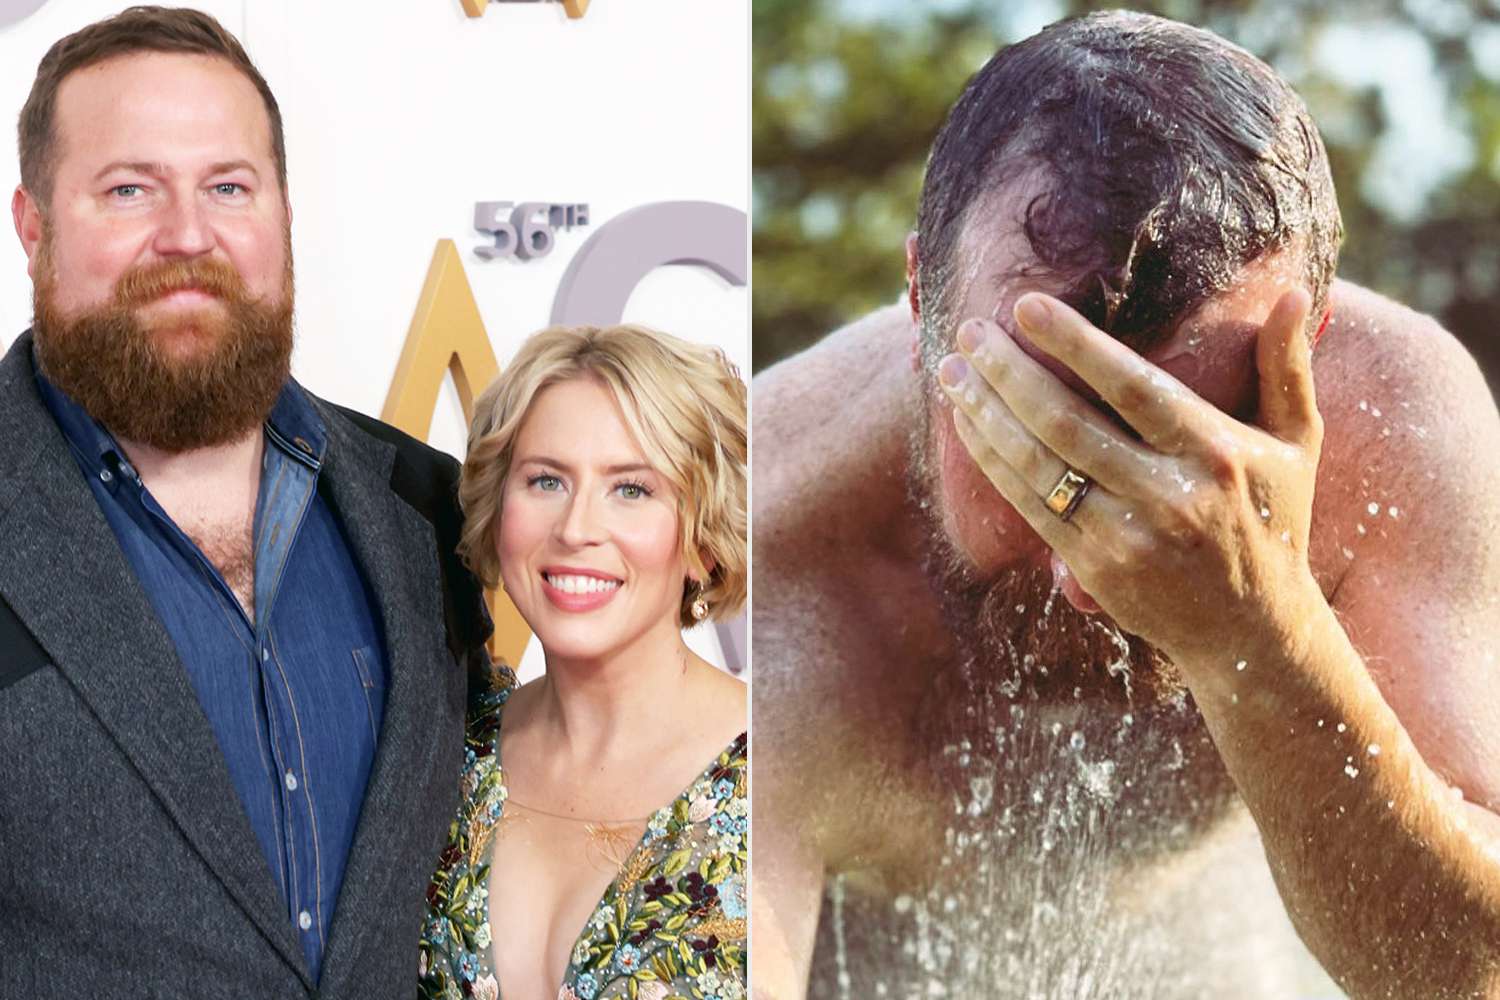 Fans Think Ben Napier Looks 'Naked' in Swimsuit Photo Shared by Wife Erin